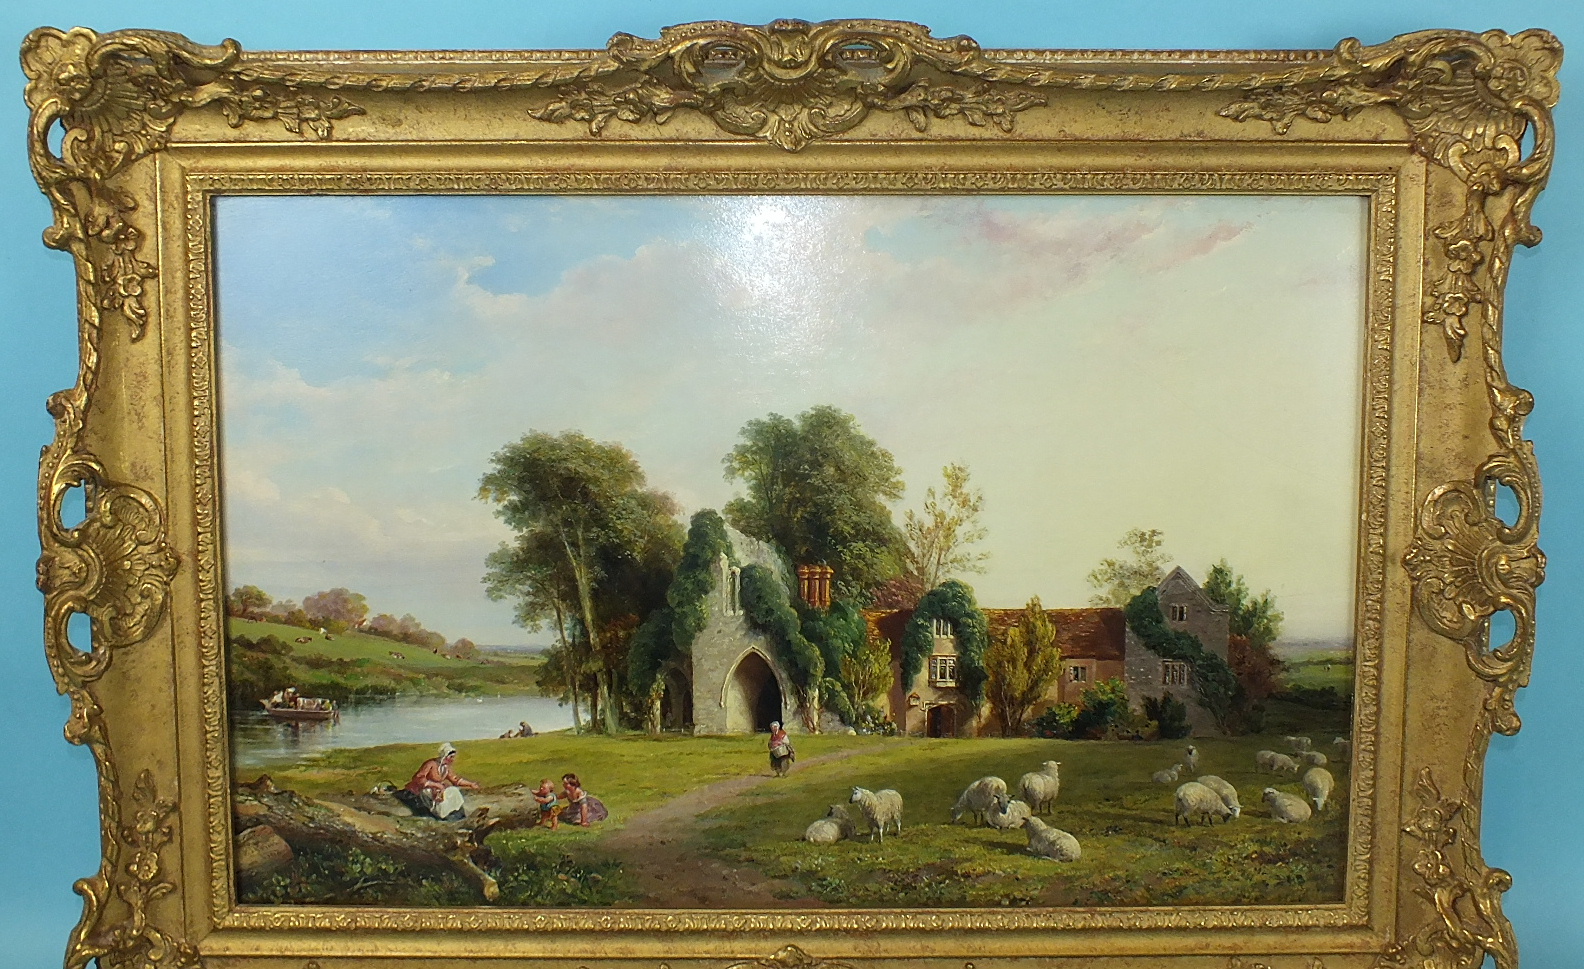 Edmund Thomas Parris (1793-1873) MEDMENHAM ABBEY, DANESFIELD, MARLOW, SHEEP AND FIGURES IN FRONT - Image 2 of 5